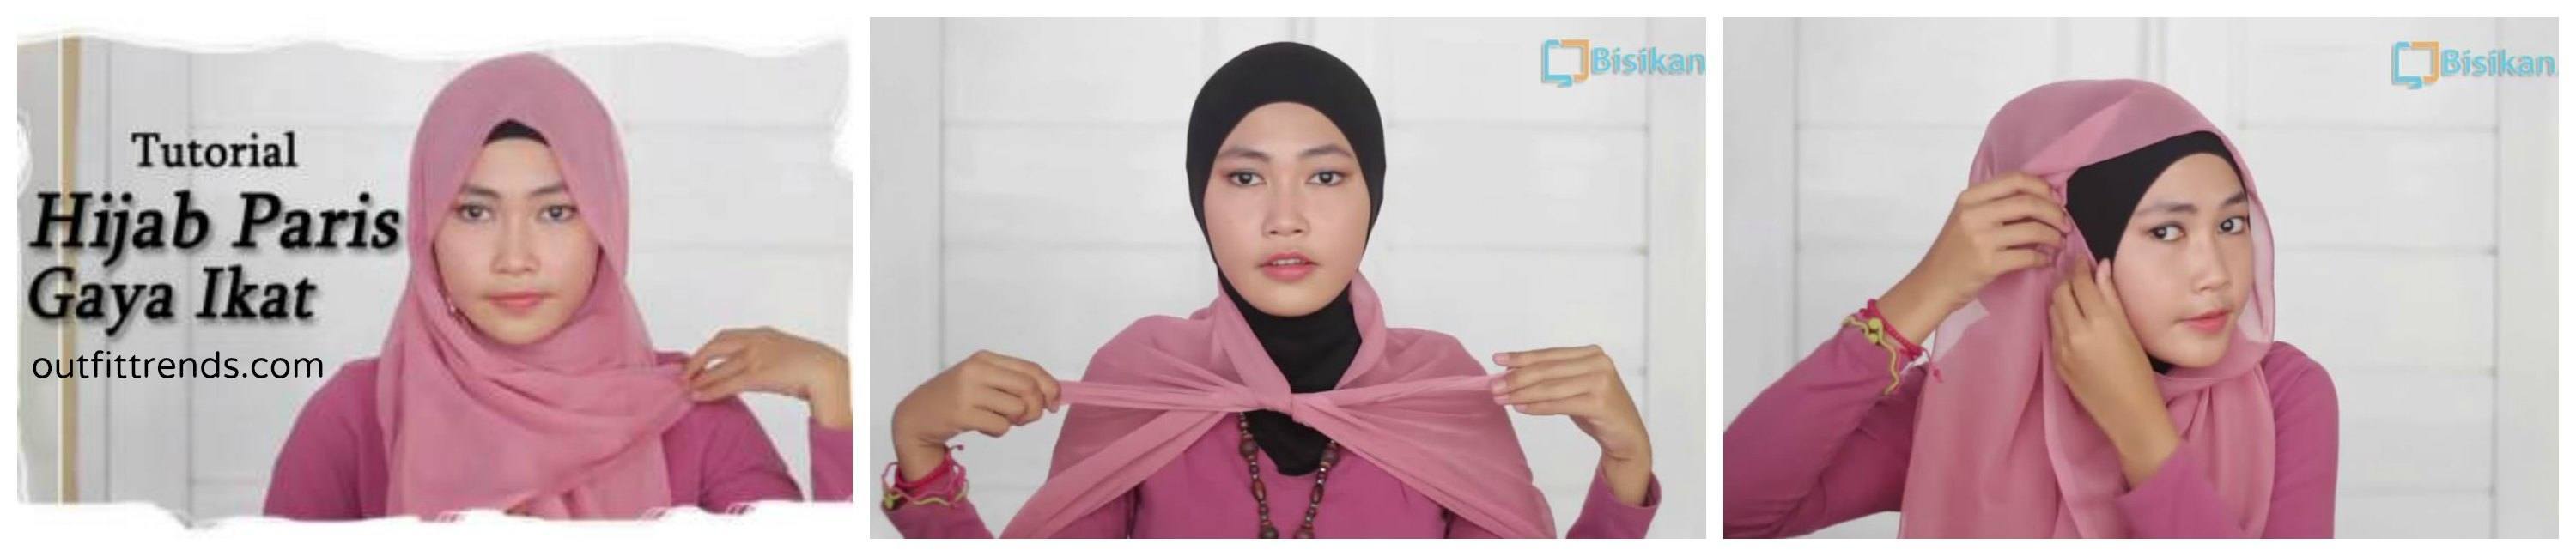 10 Simple Hijab Paris Tutorials You Can Do In Less Than a Minute